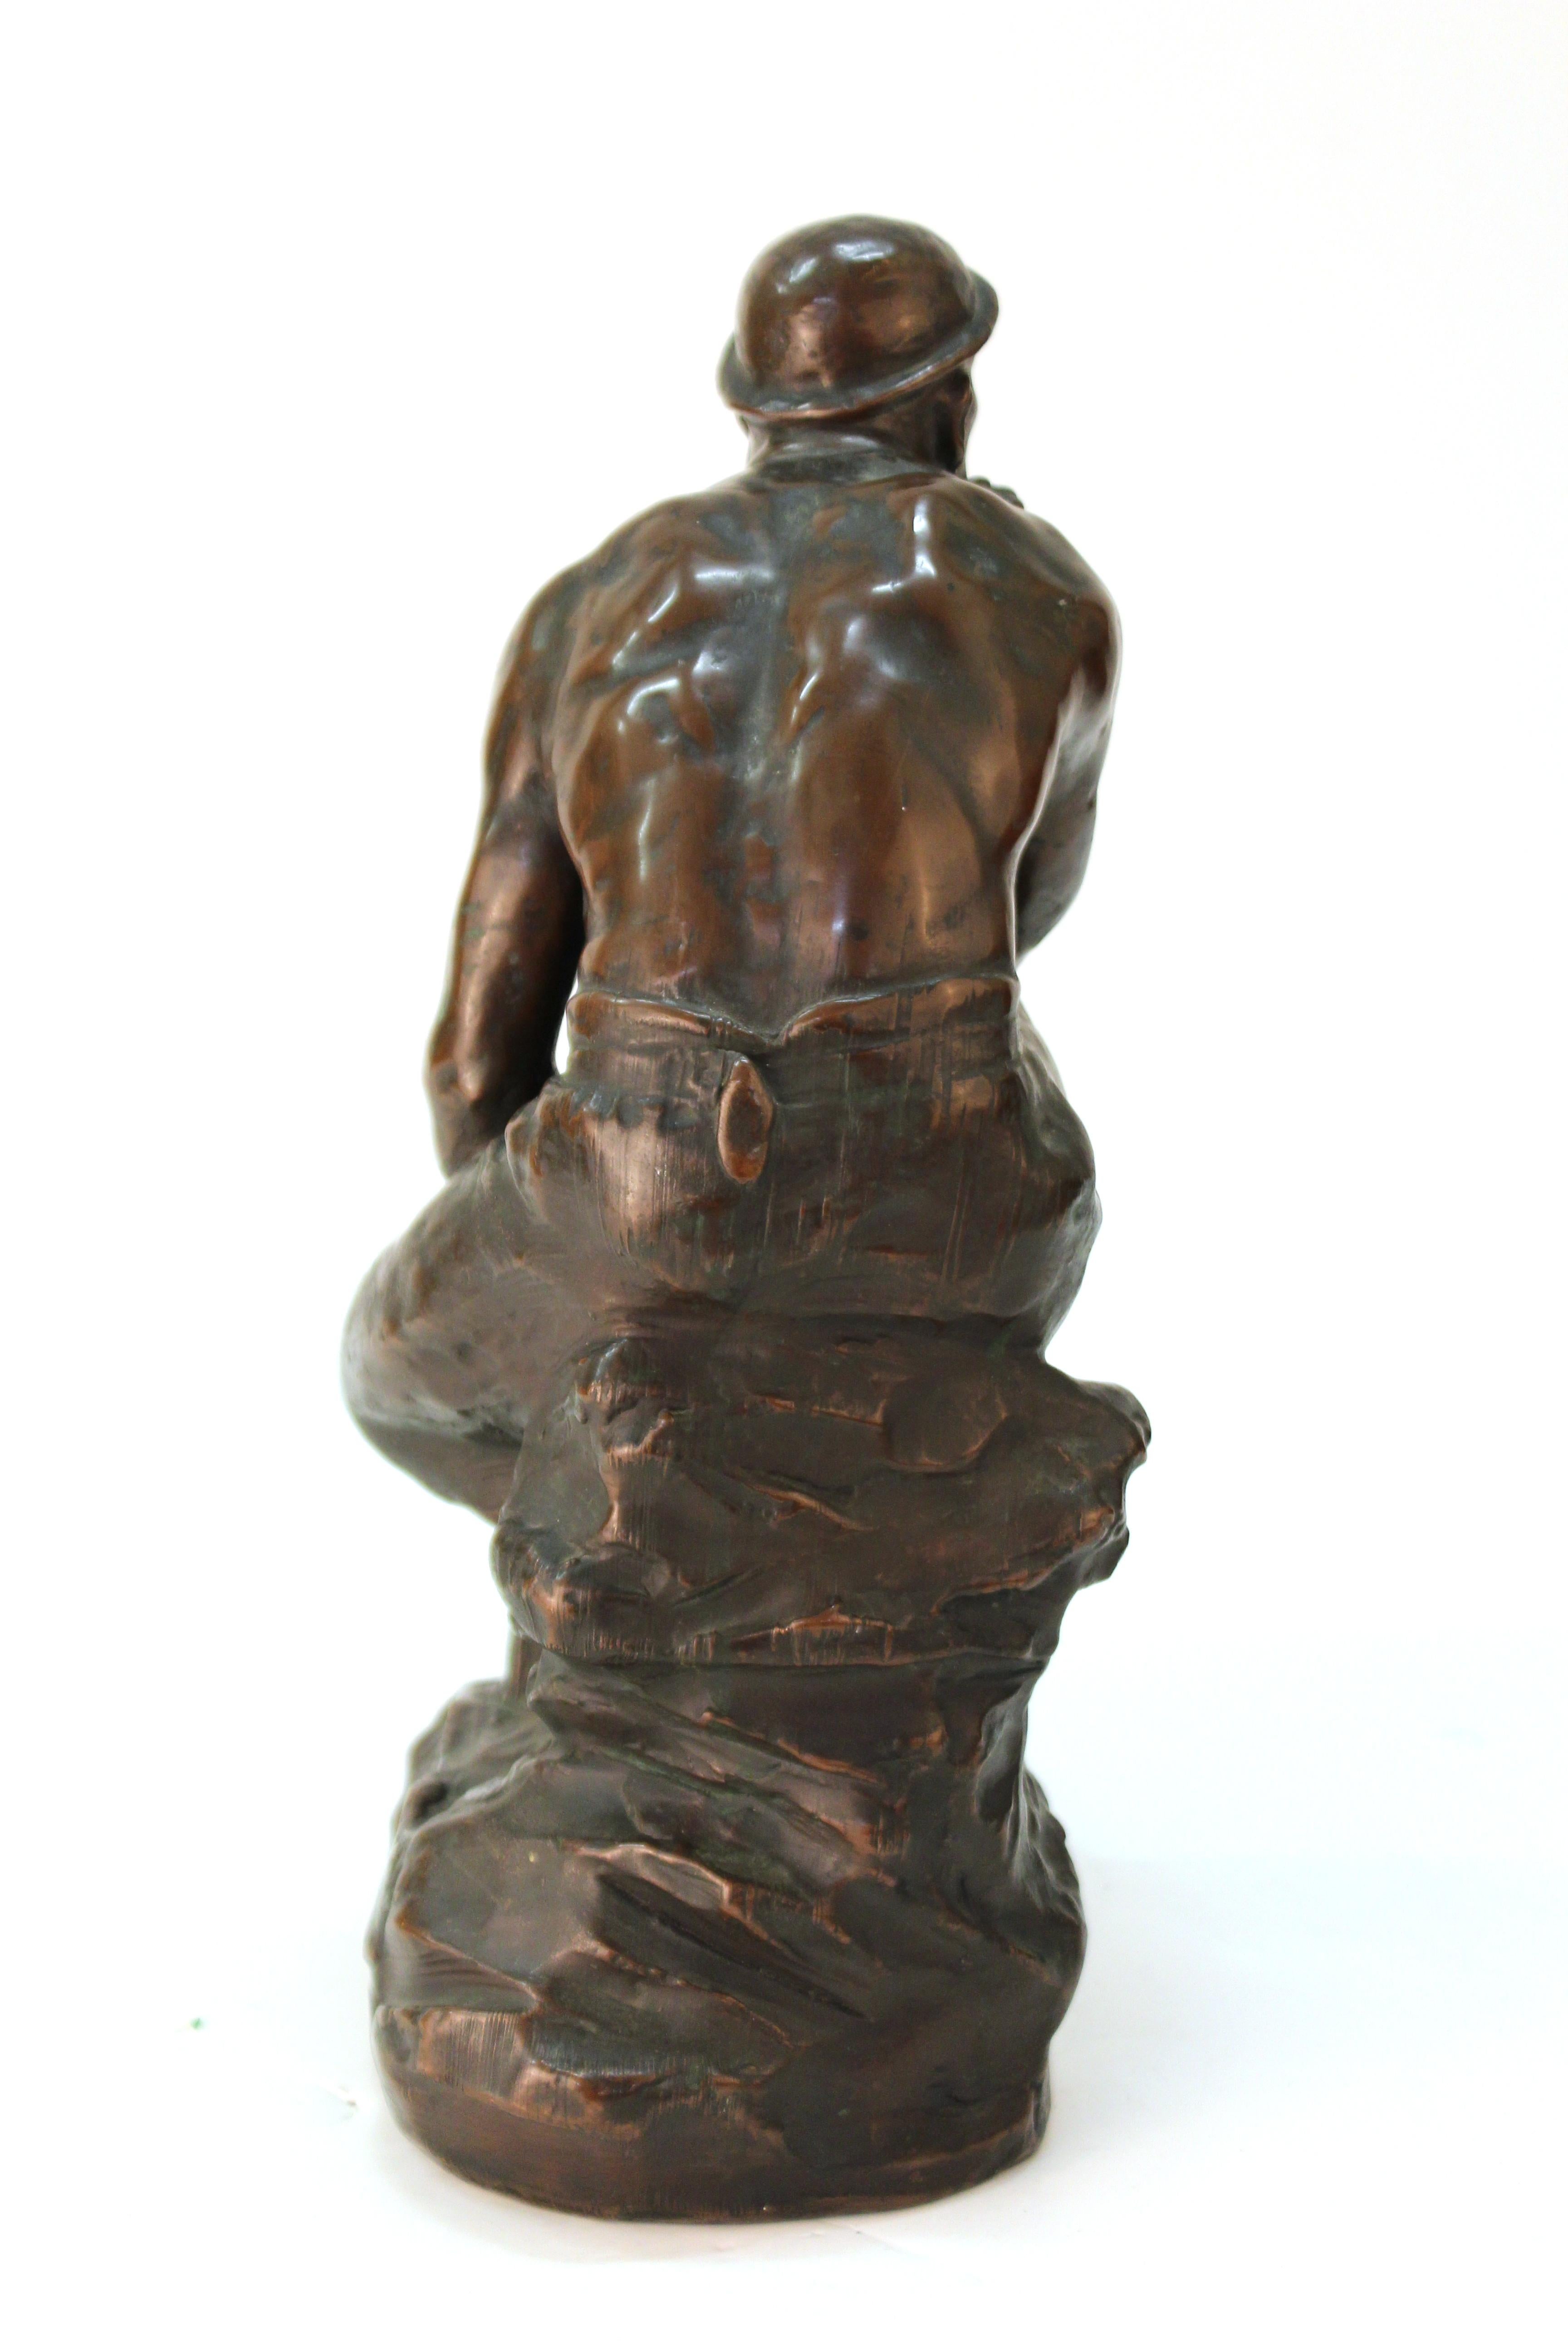 Early 20th Century Art Deco Sculpture of an Industry Worker